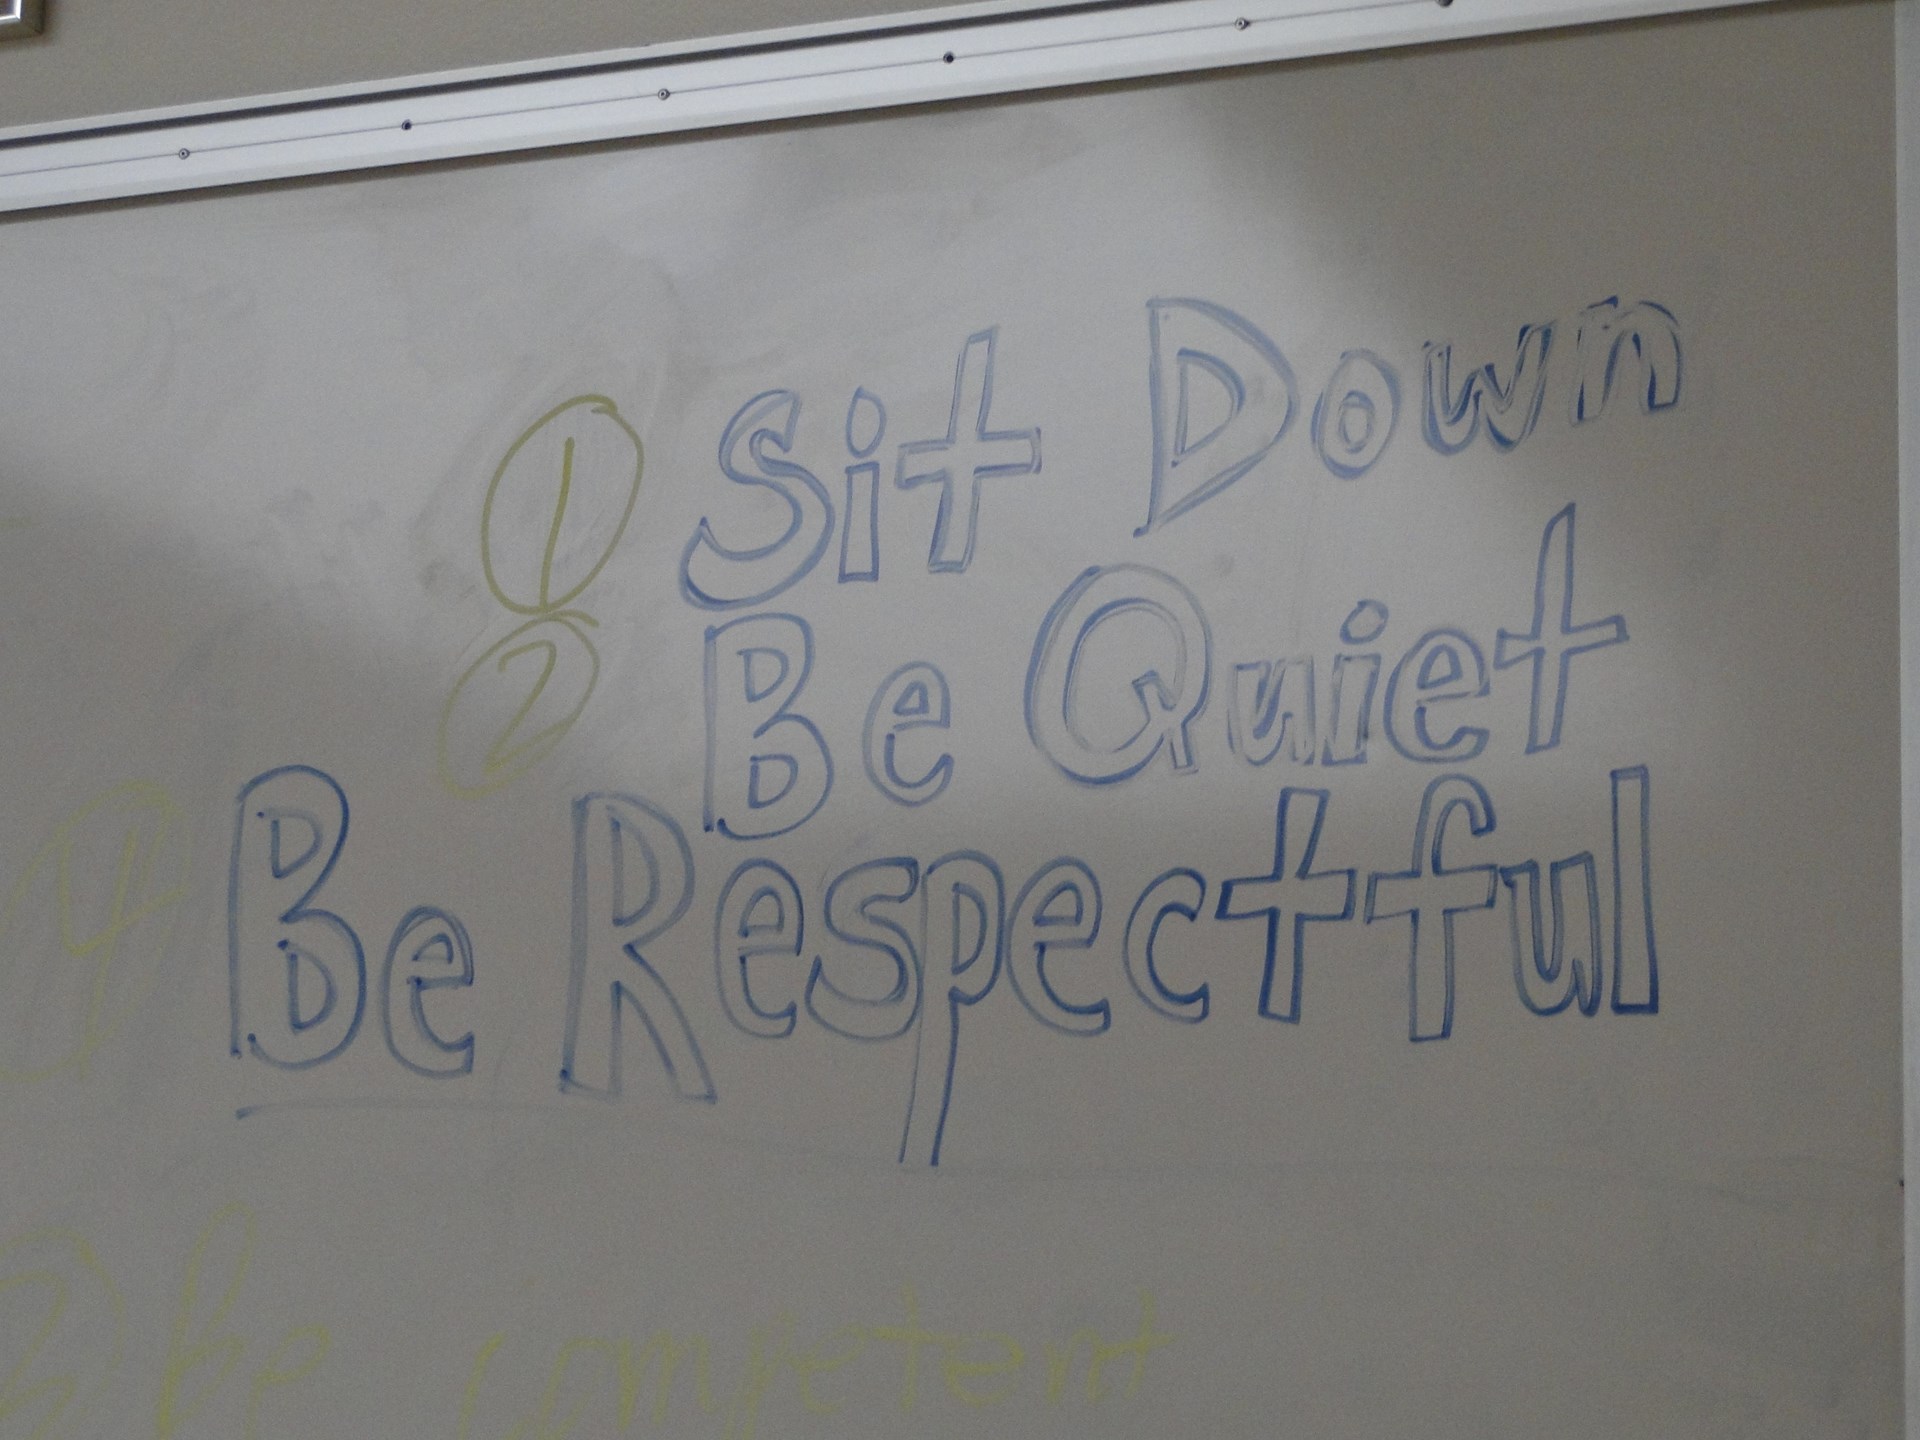 Message to students who enter the VMD classroom.